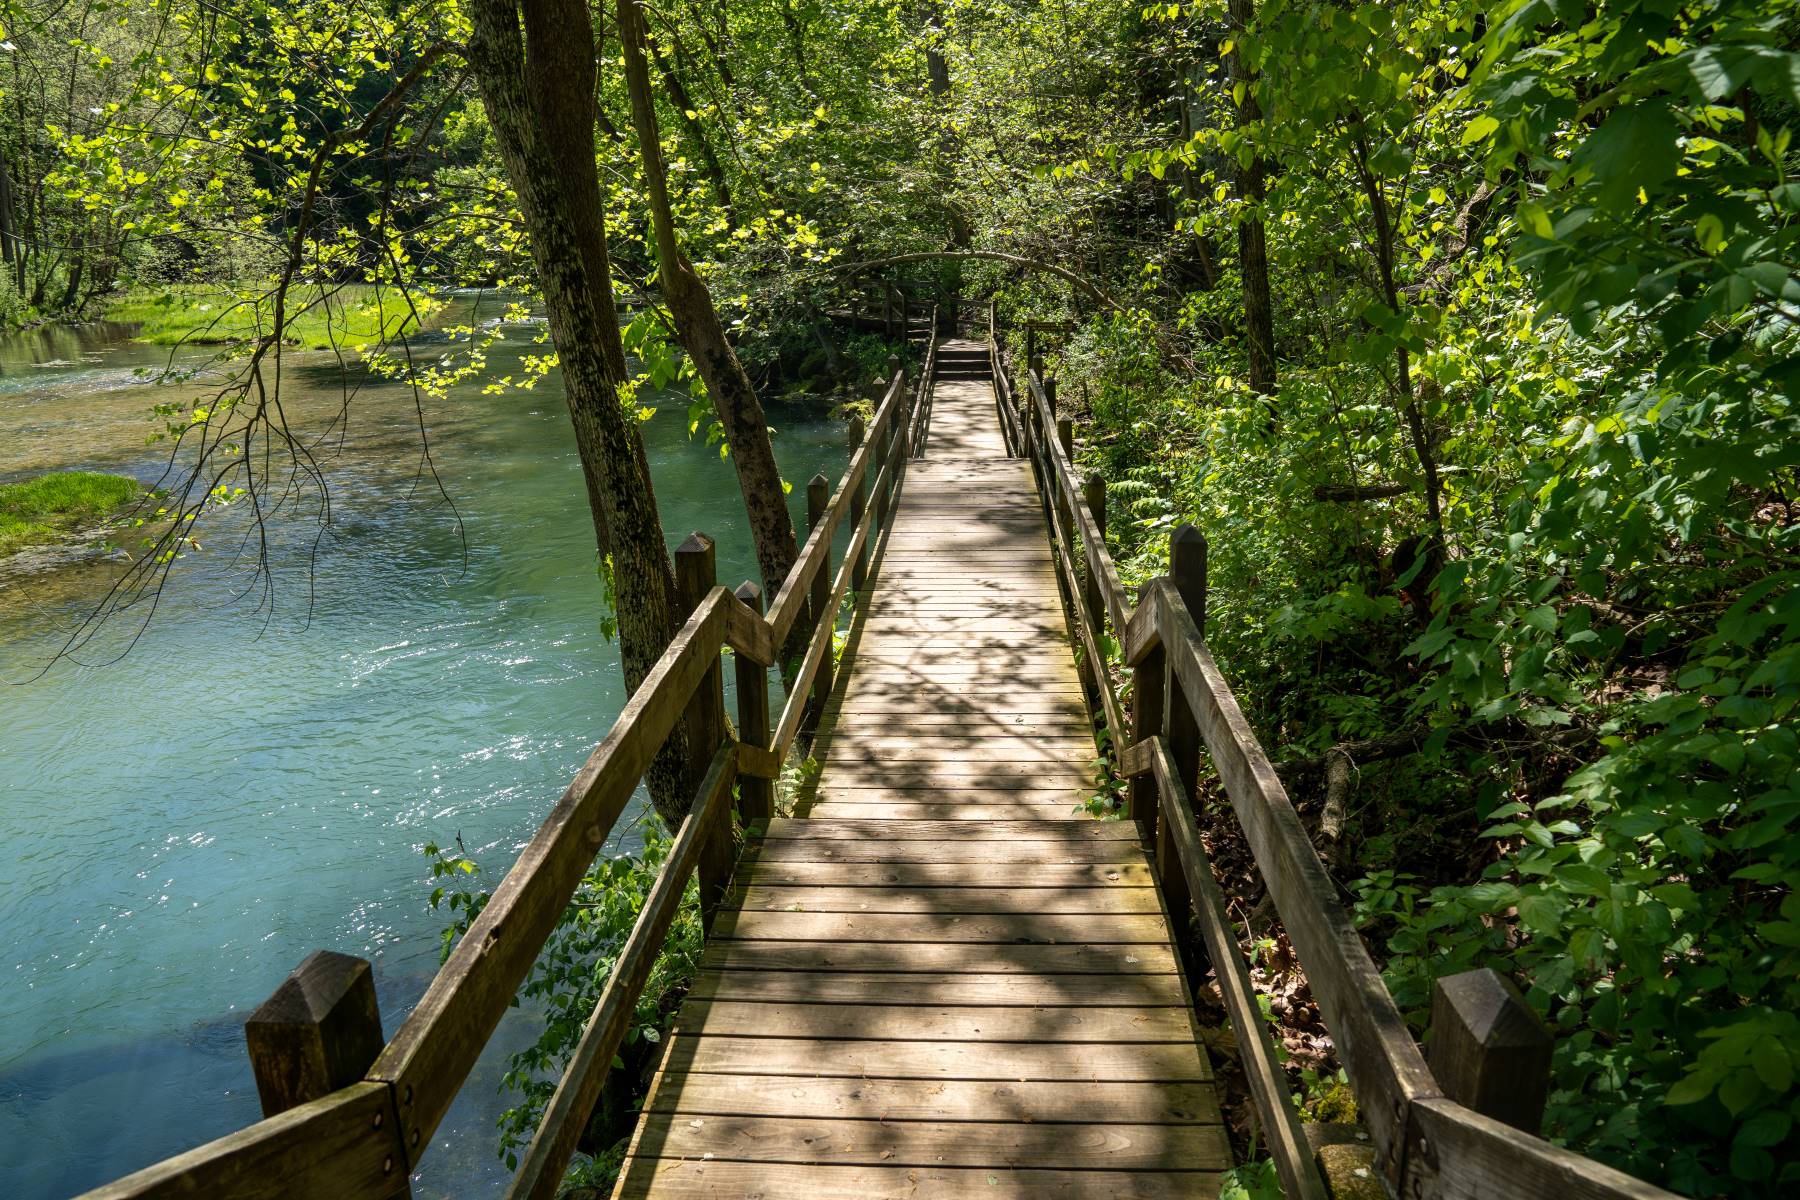 View these tranquil springs by hiking in Missouri state parks like Ha Ha Tonka.